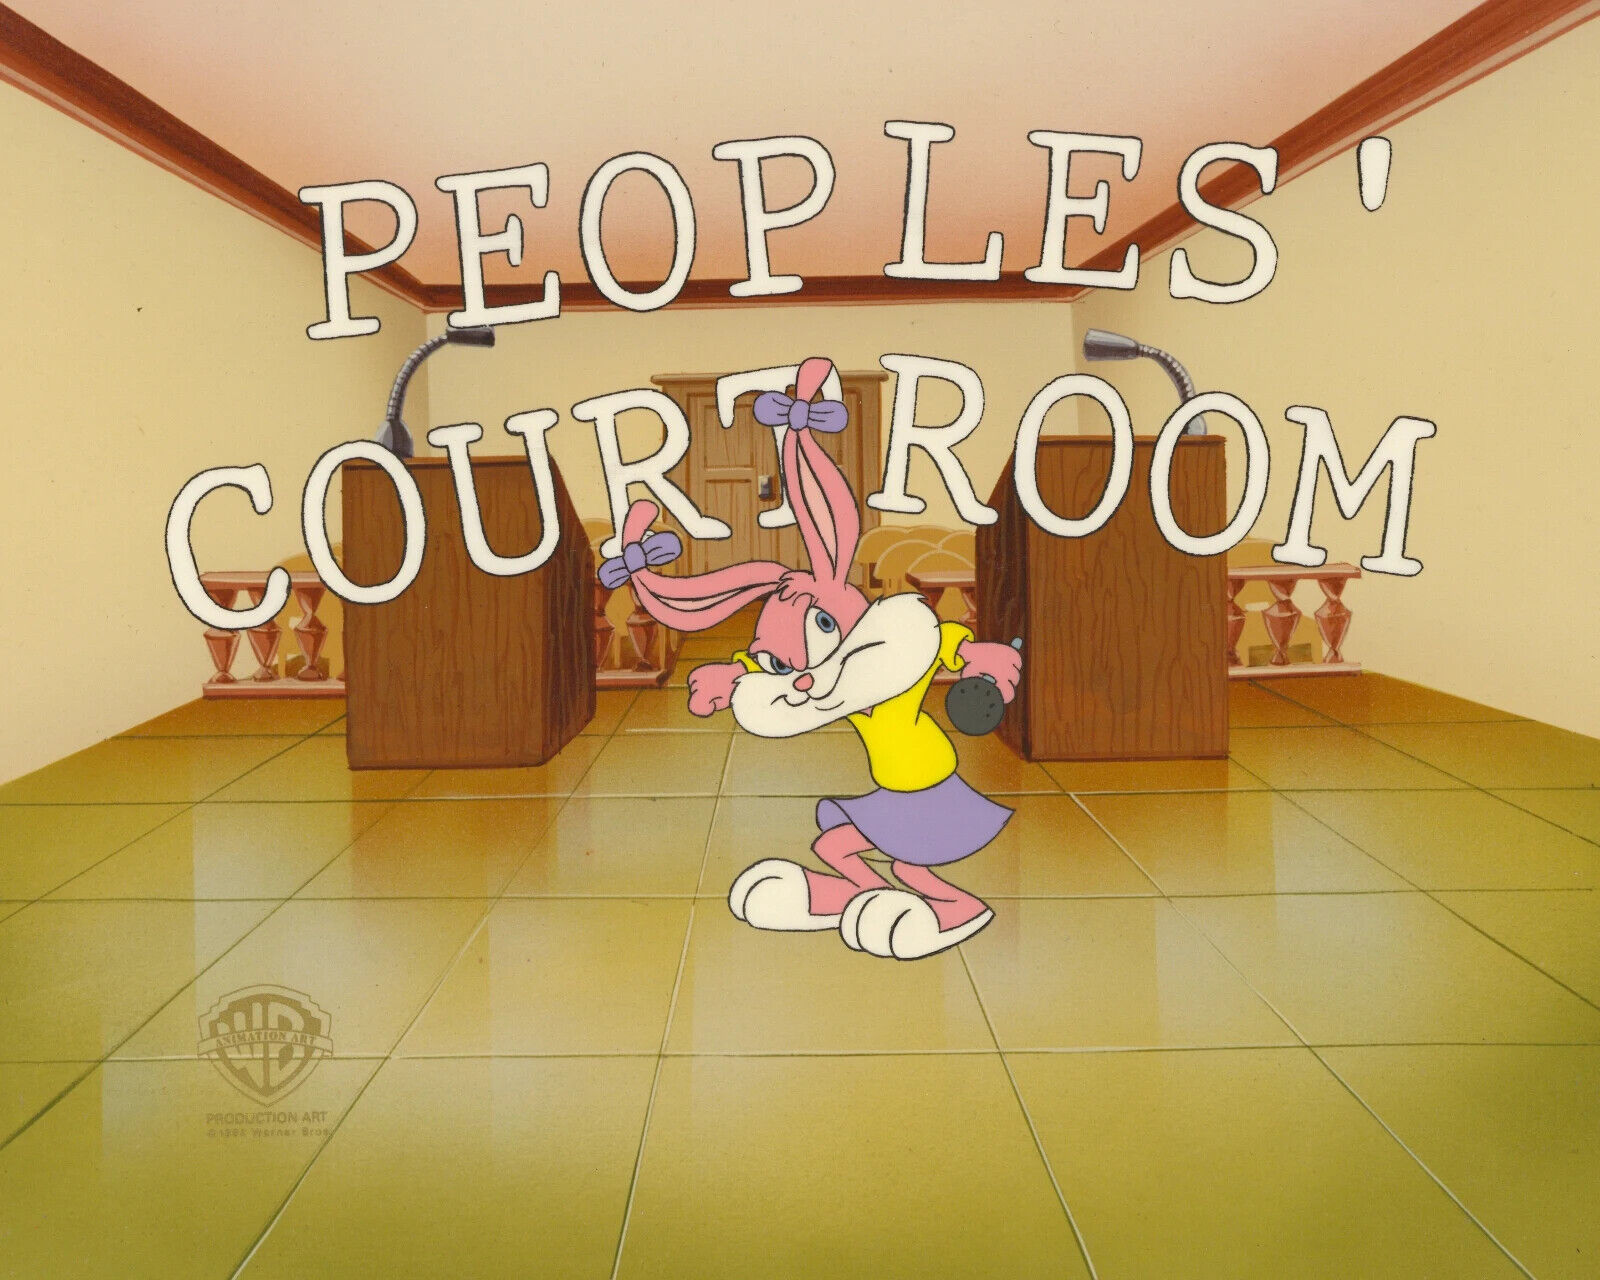 Tiny Toons Adventures-Original Production Cel-Babs Bunny-Peoples Court Room